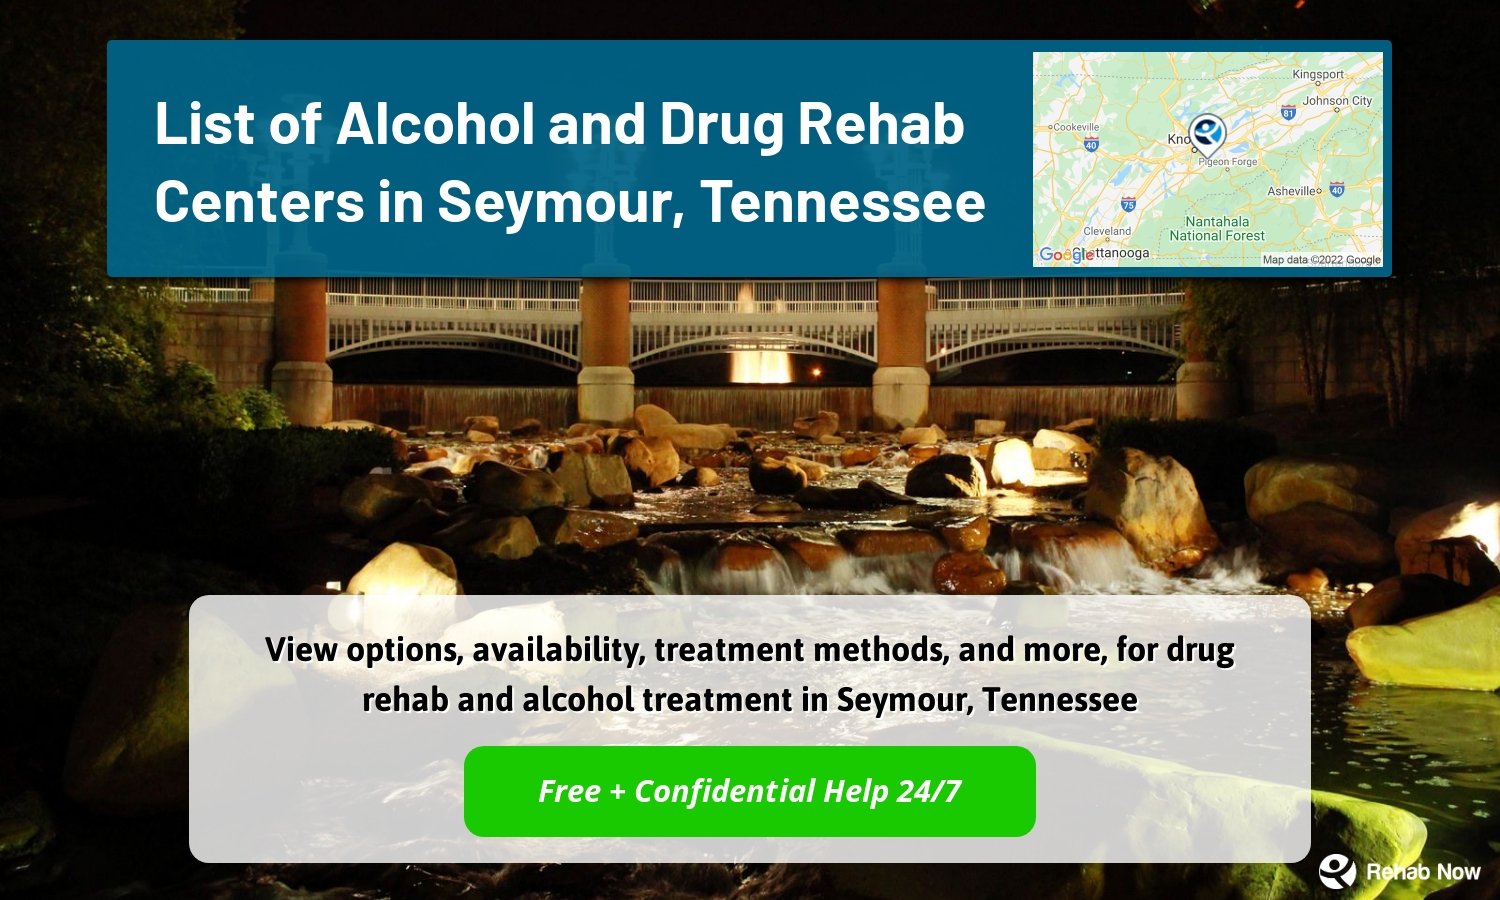 View options, availability, treatment methods, and more, for drug rehab and alcohol treatment in Seymour, Tennessee